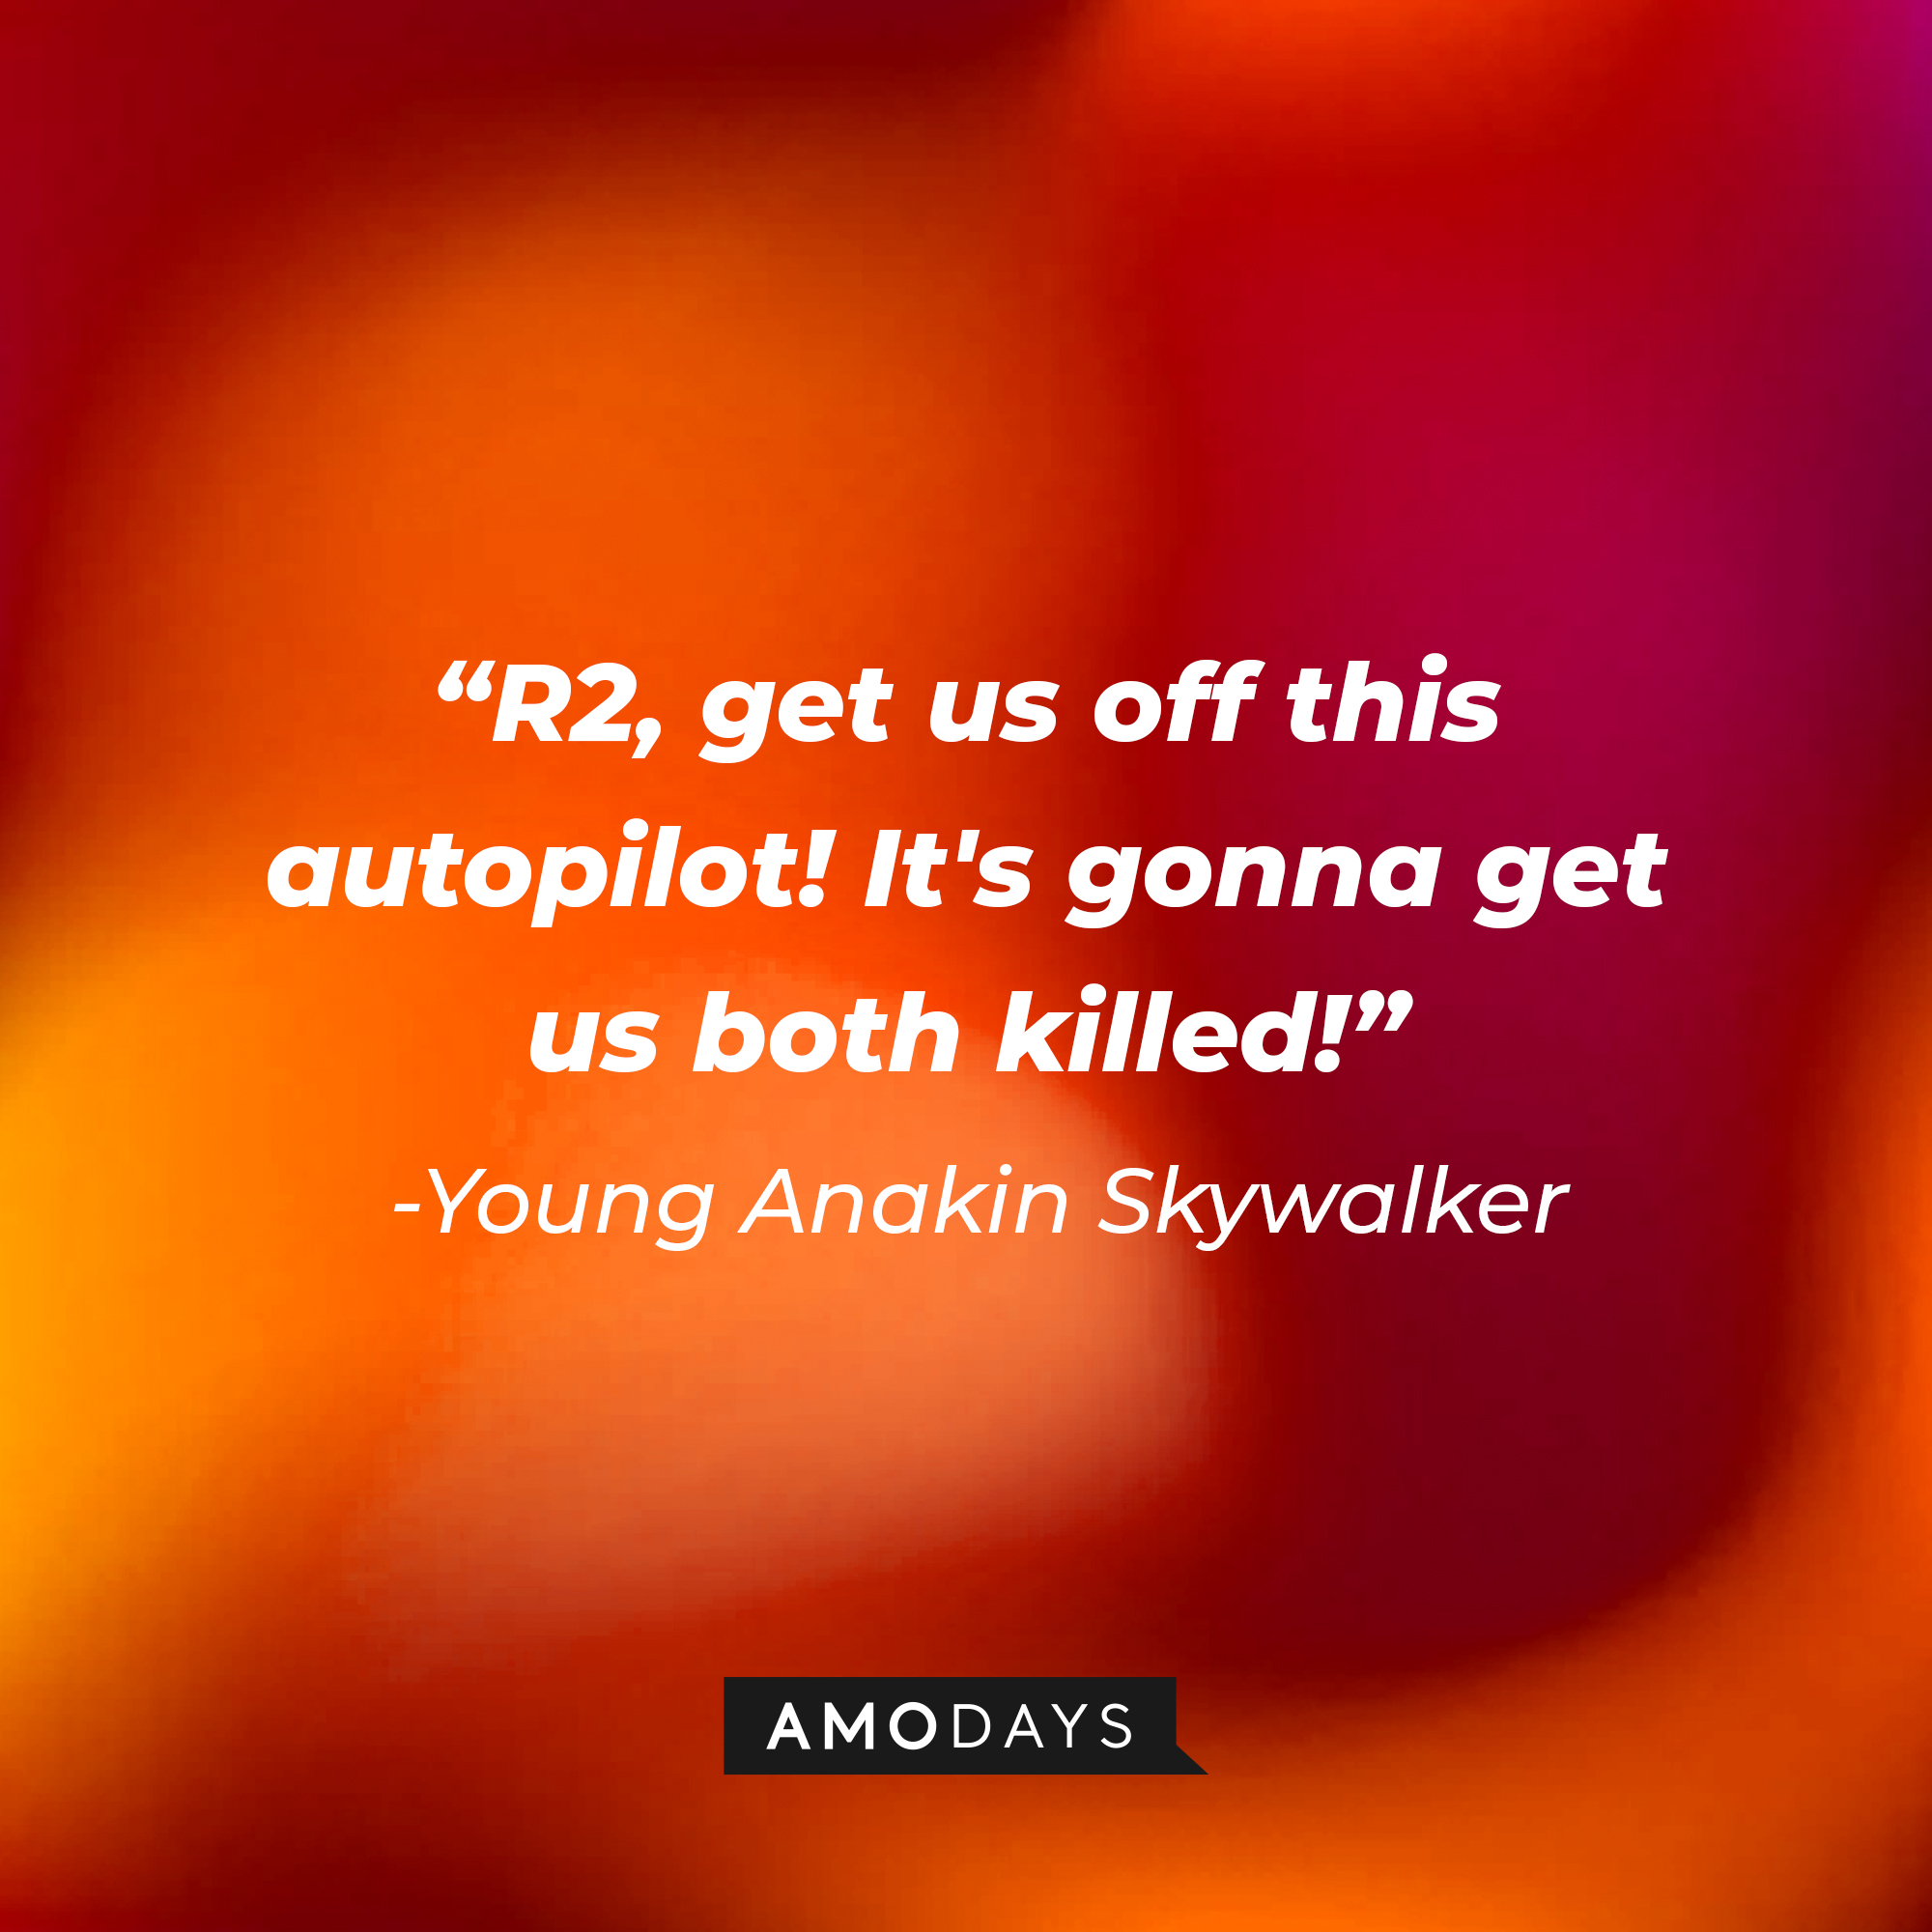 Young Anakin Skywalker's quote: "R2, get us off this autopilot! It's gonna get us both killed!" | Source: AmoDays